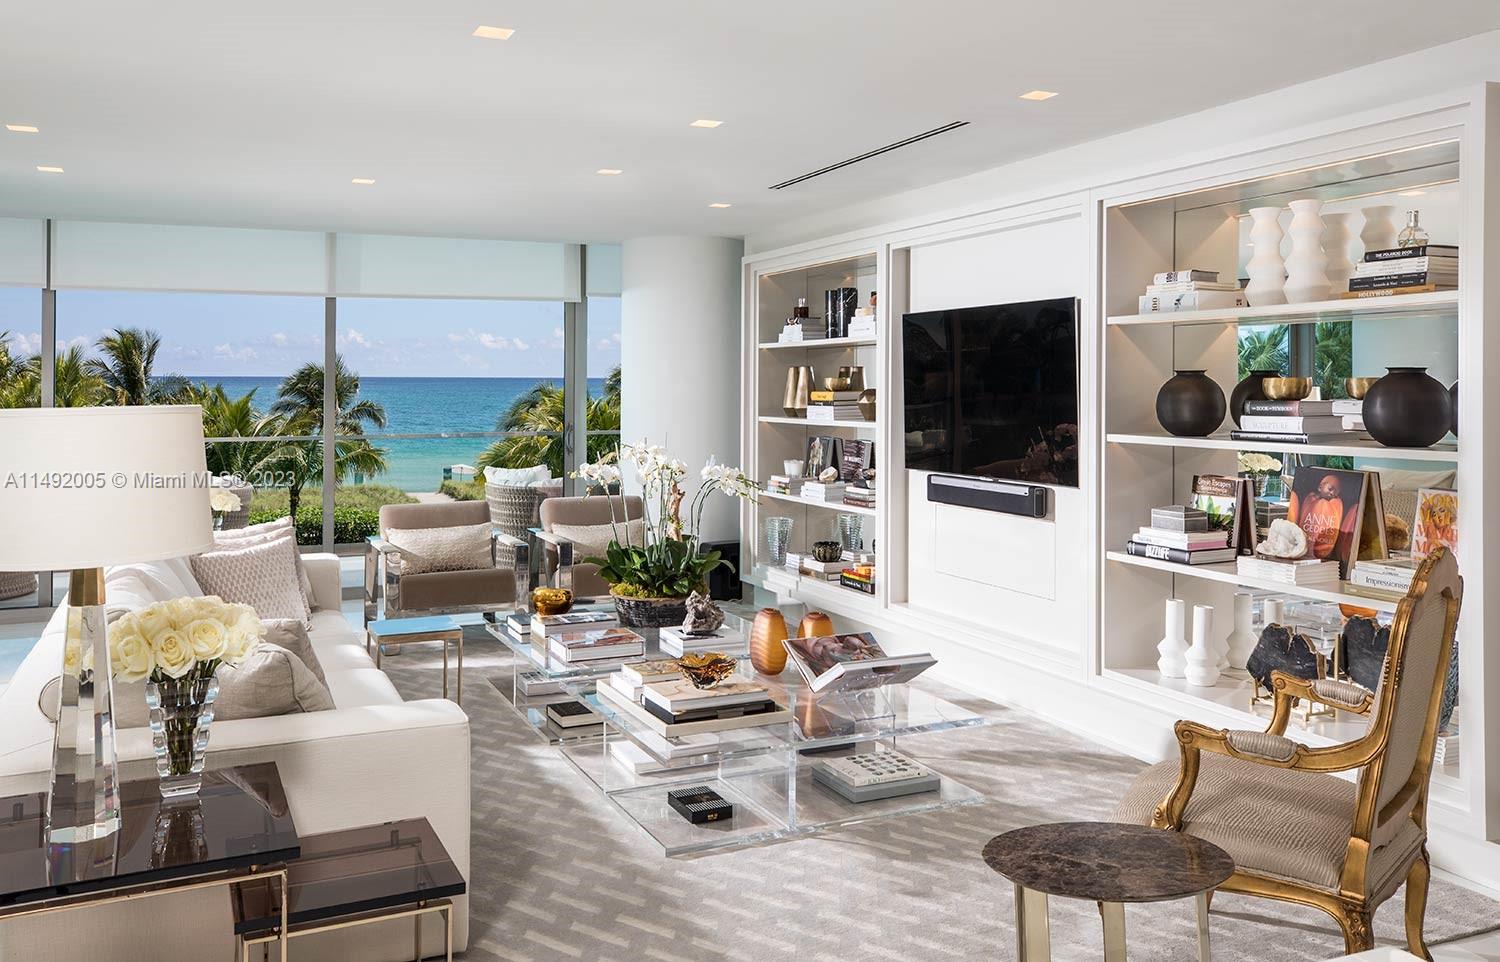 Enchanting oceanfront living awaits in this exquisite corner unit at Oceana Bal Harbour. This lower floor residence boasts a captivating blend of luxury & serenity, offering 2 bedrooms & 2 1/2 baths. Sunlight dances through the expansive windows, filling the space with a warm, inviting glow that enhances the already breathtaking views of the ocean. The thoughtful design of this home seamlessly integrates the beauty of the natural surroundings, creating a harmonious retreat for residents. With its prime location, luxurious amenities, and the the allure continues with two pools, inviting you to bask in the Florida sun while overlooking the azure waters. For those with a passion for tennis, 2 clay courts await, providing the perfect setting for a match with the ocean breeze as your backdrop.